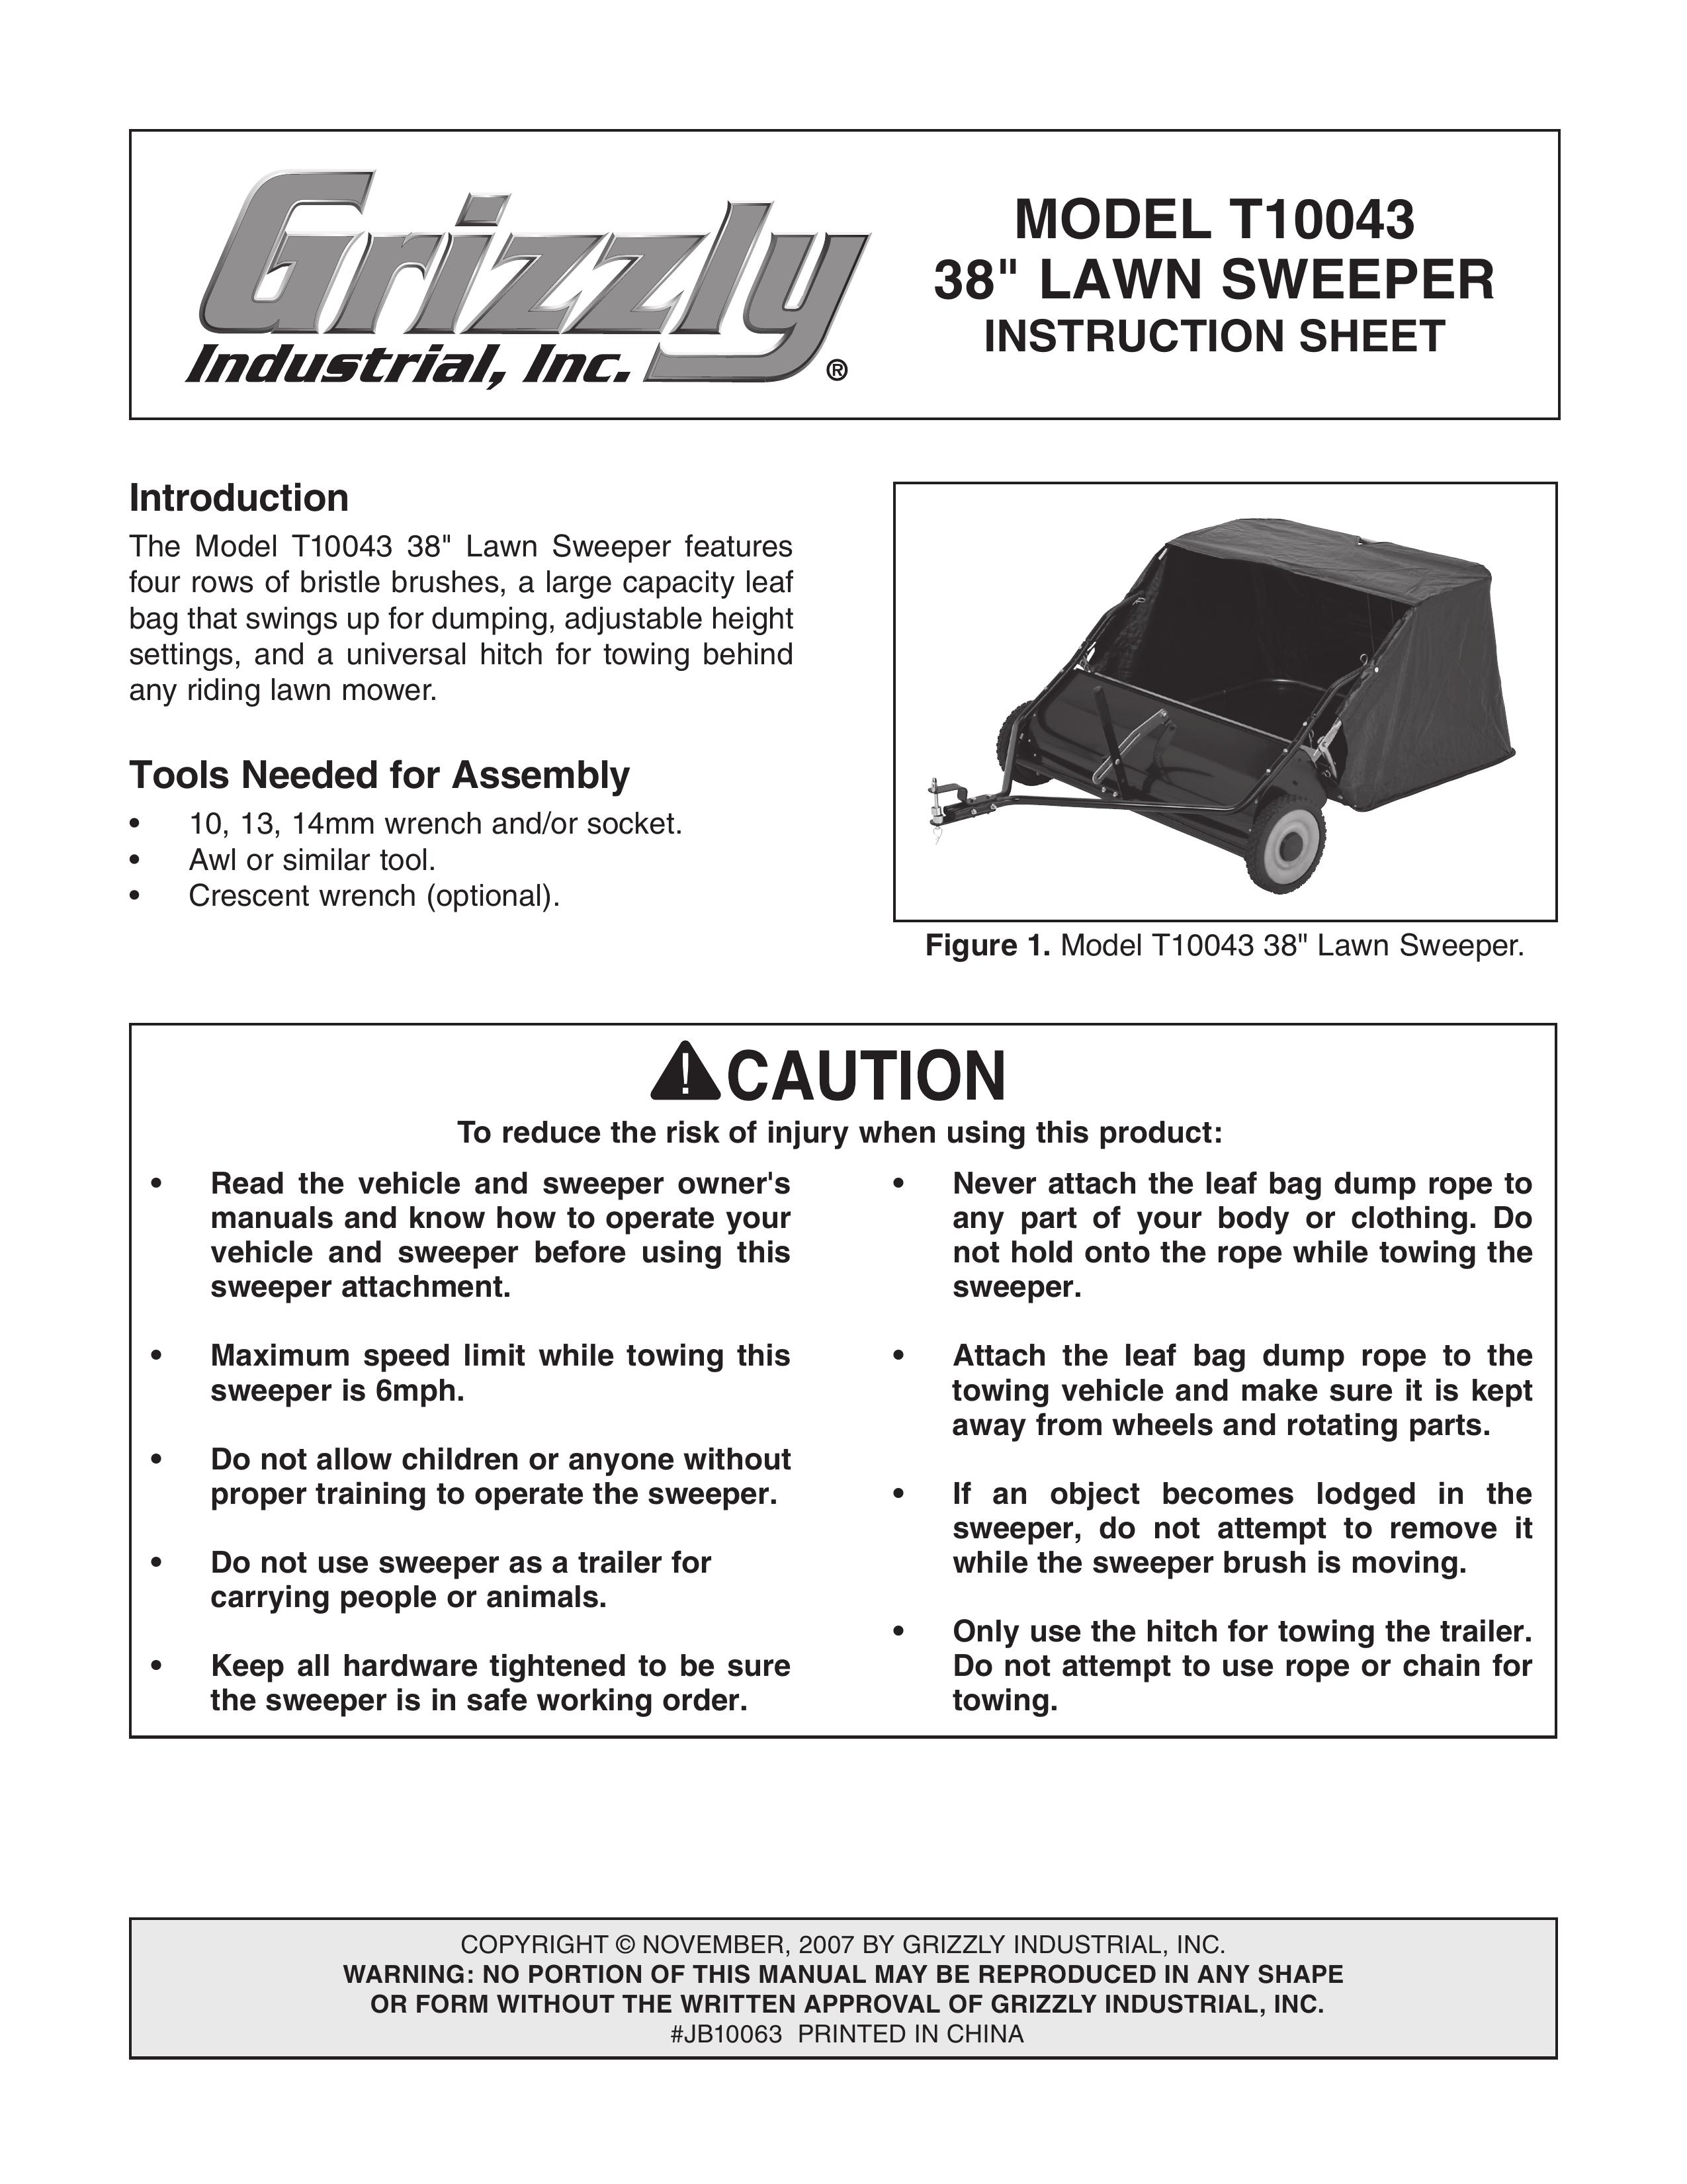 Grizzly T10043 Lawn Sweeper User Manual